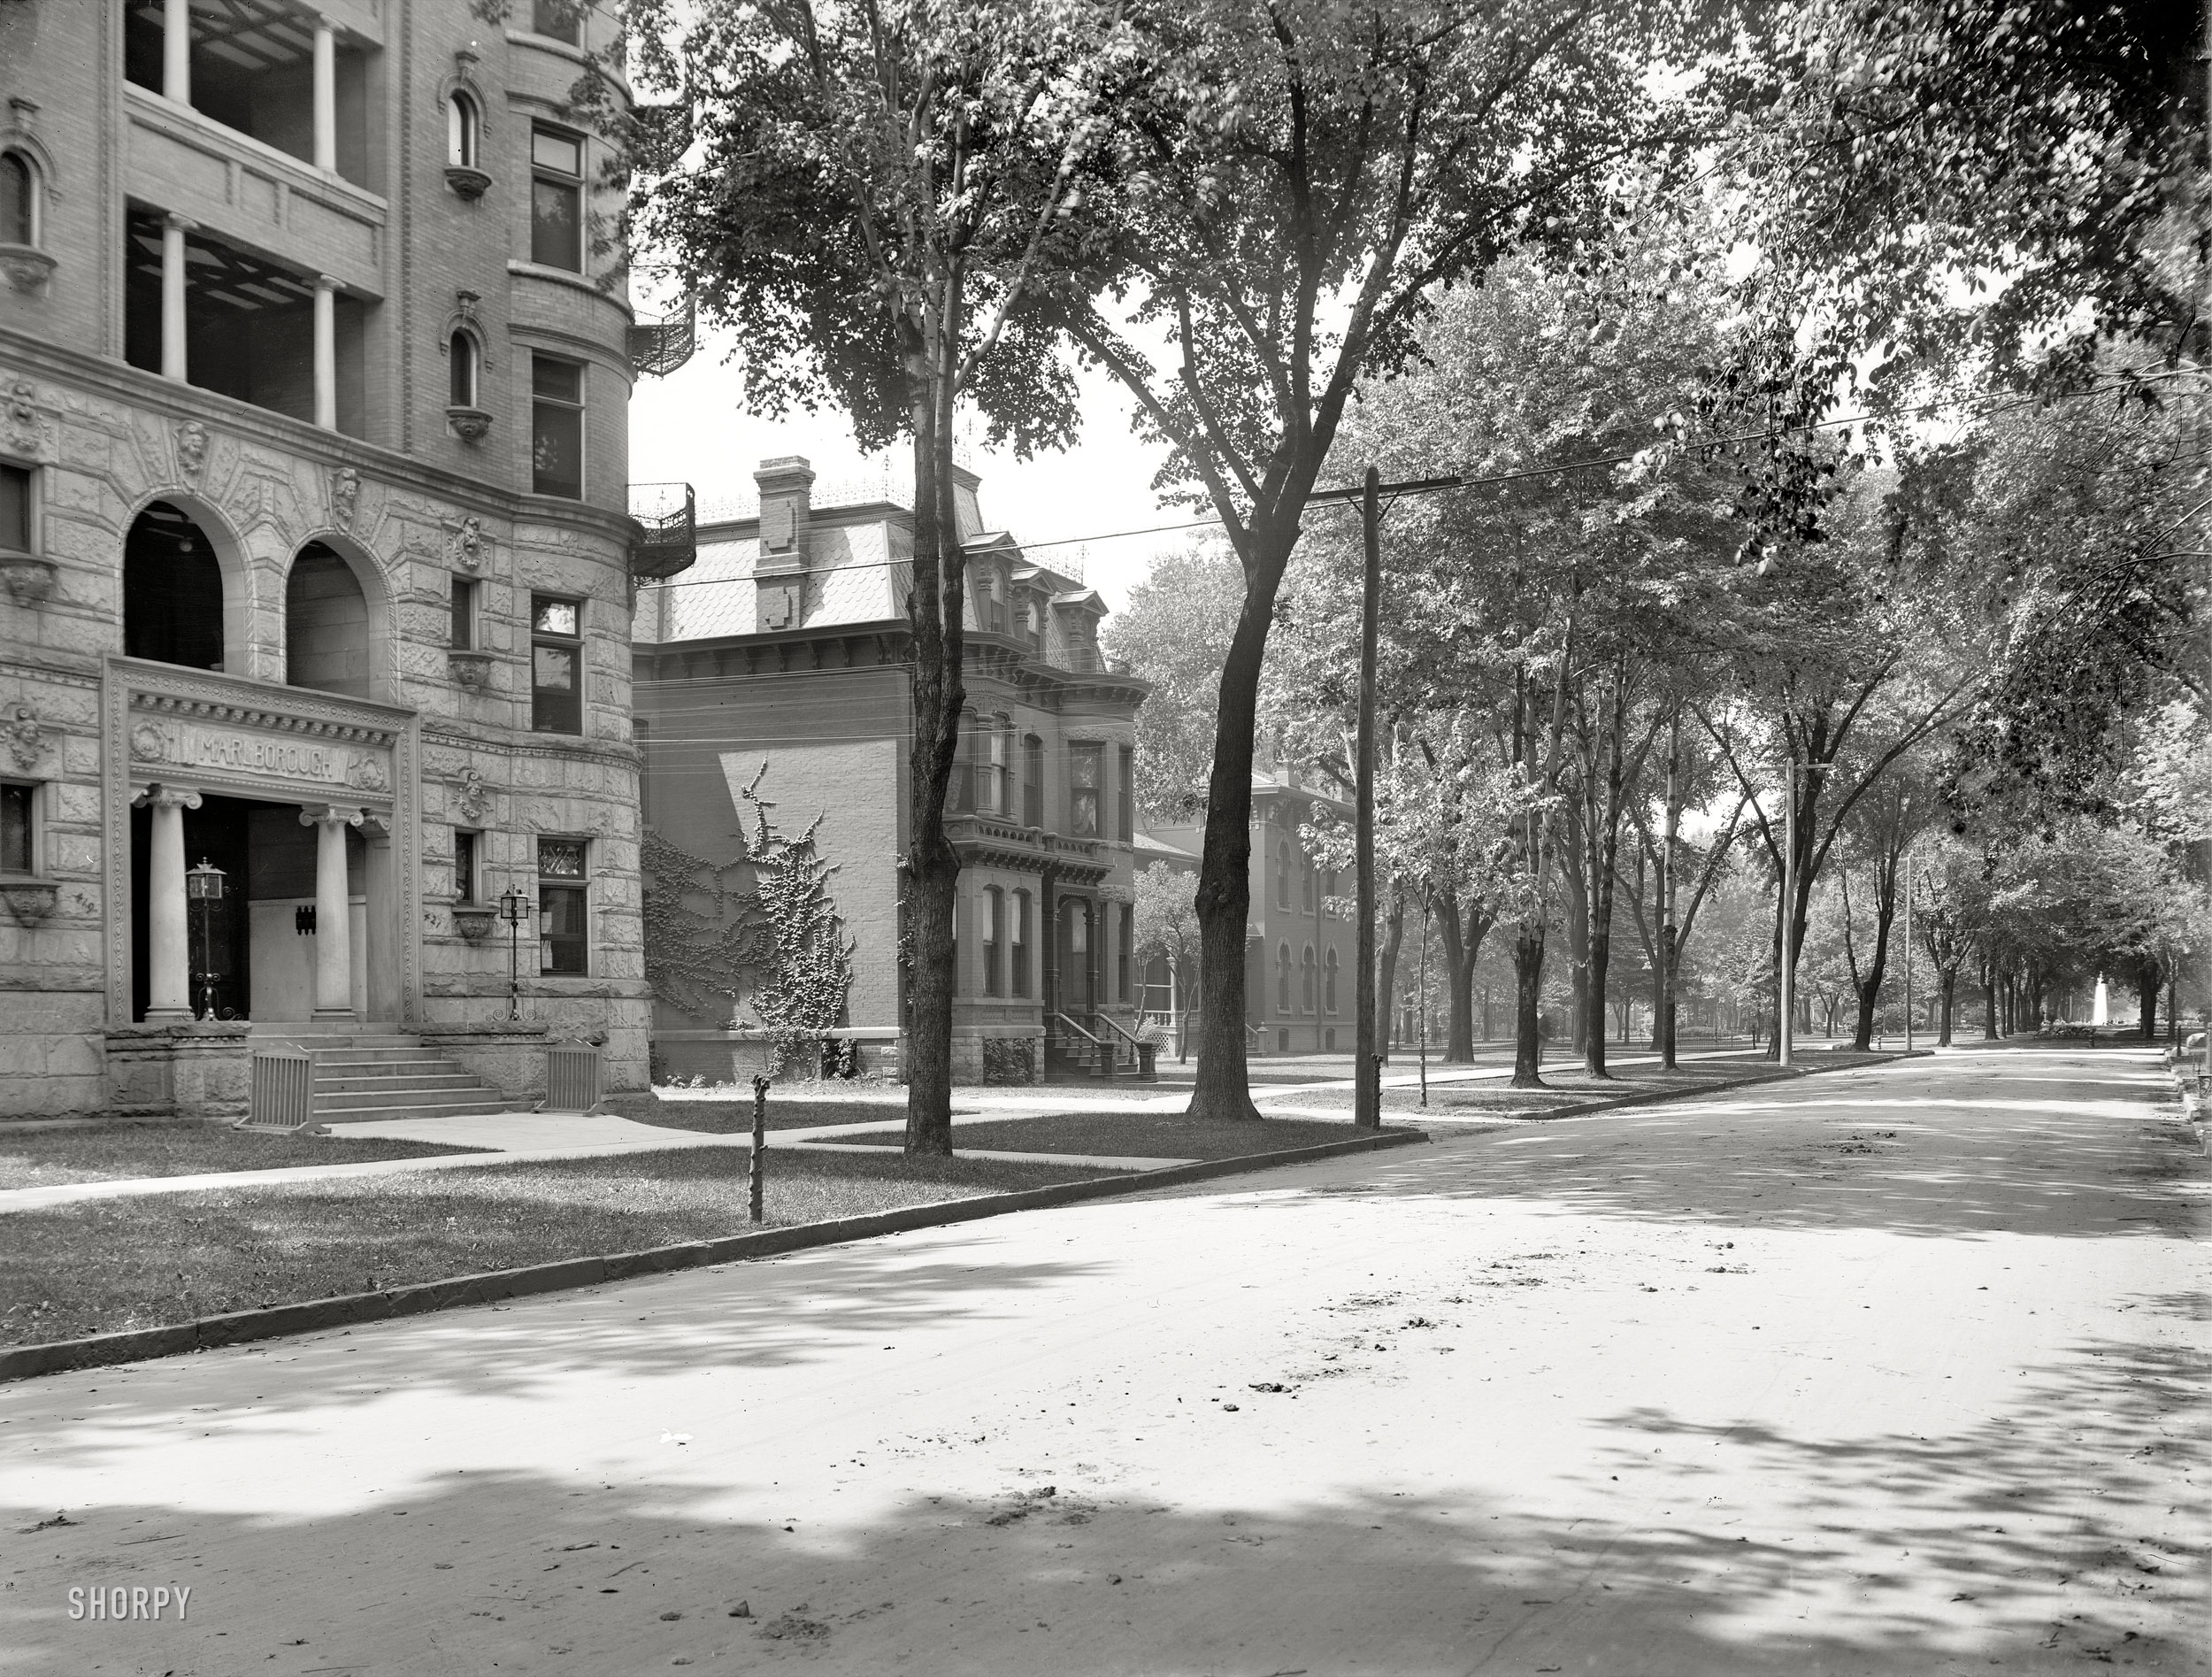 Detroit, Michigan, circa 1900. "W.H. Jackson residence." Just out of view across 2nd Avenue in this two-part panorama was the residence of Detroit Publishing photographer William Henry Jackson. 8x10 inch glass negative. View full size.